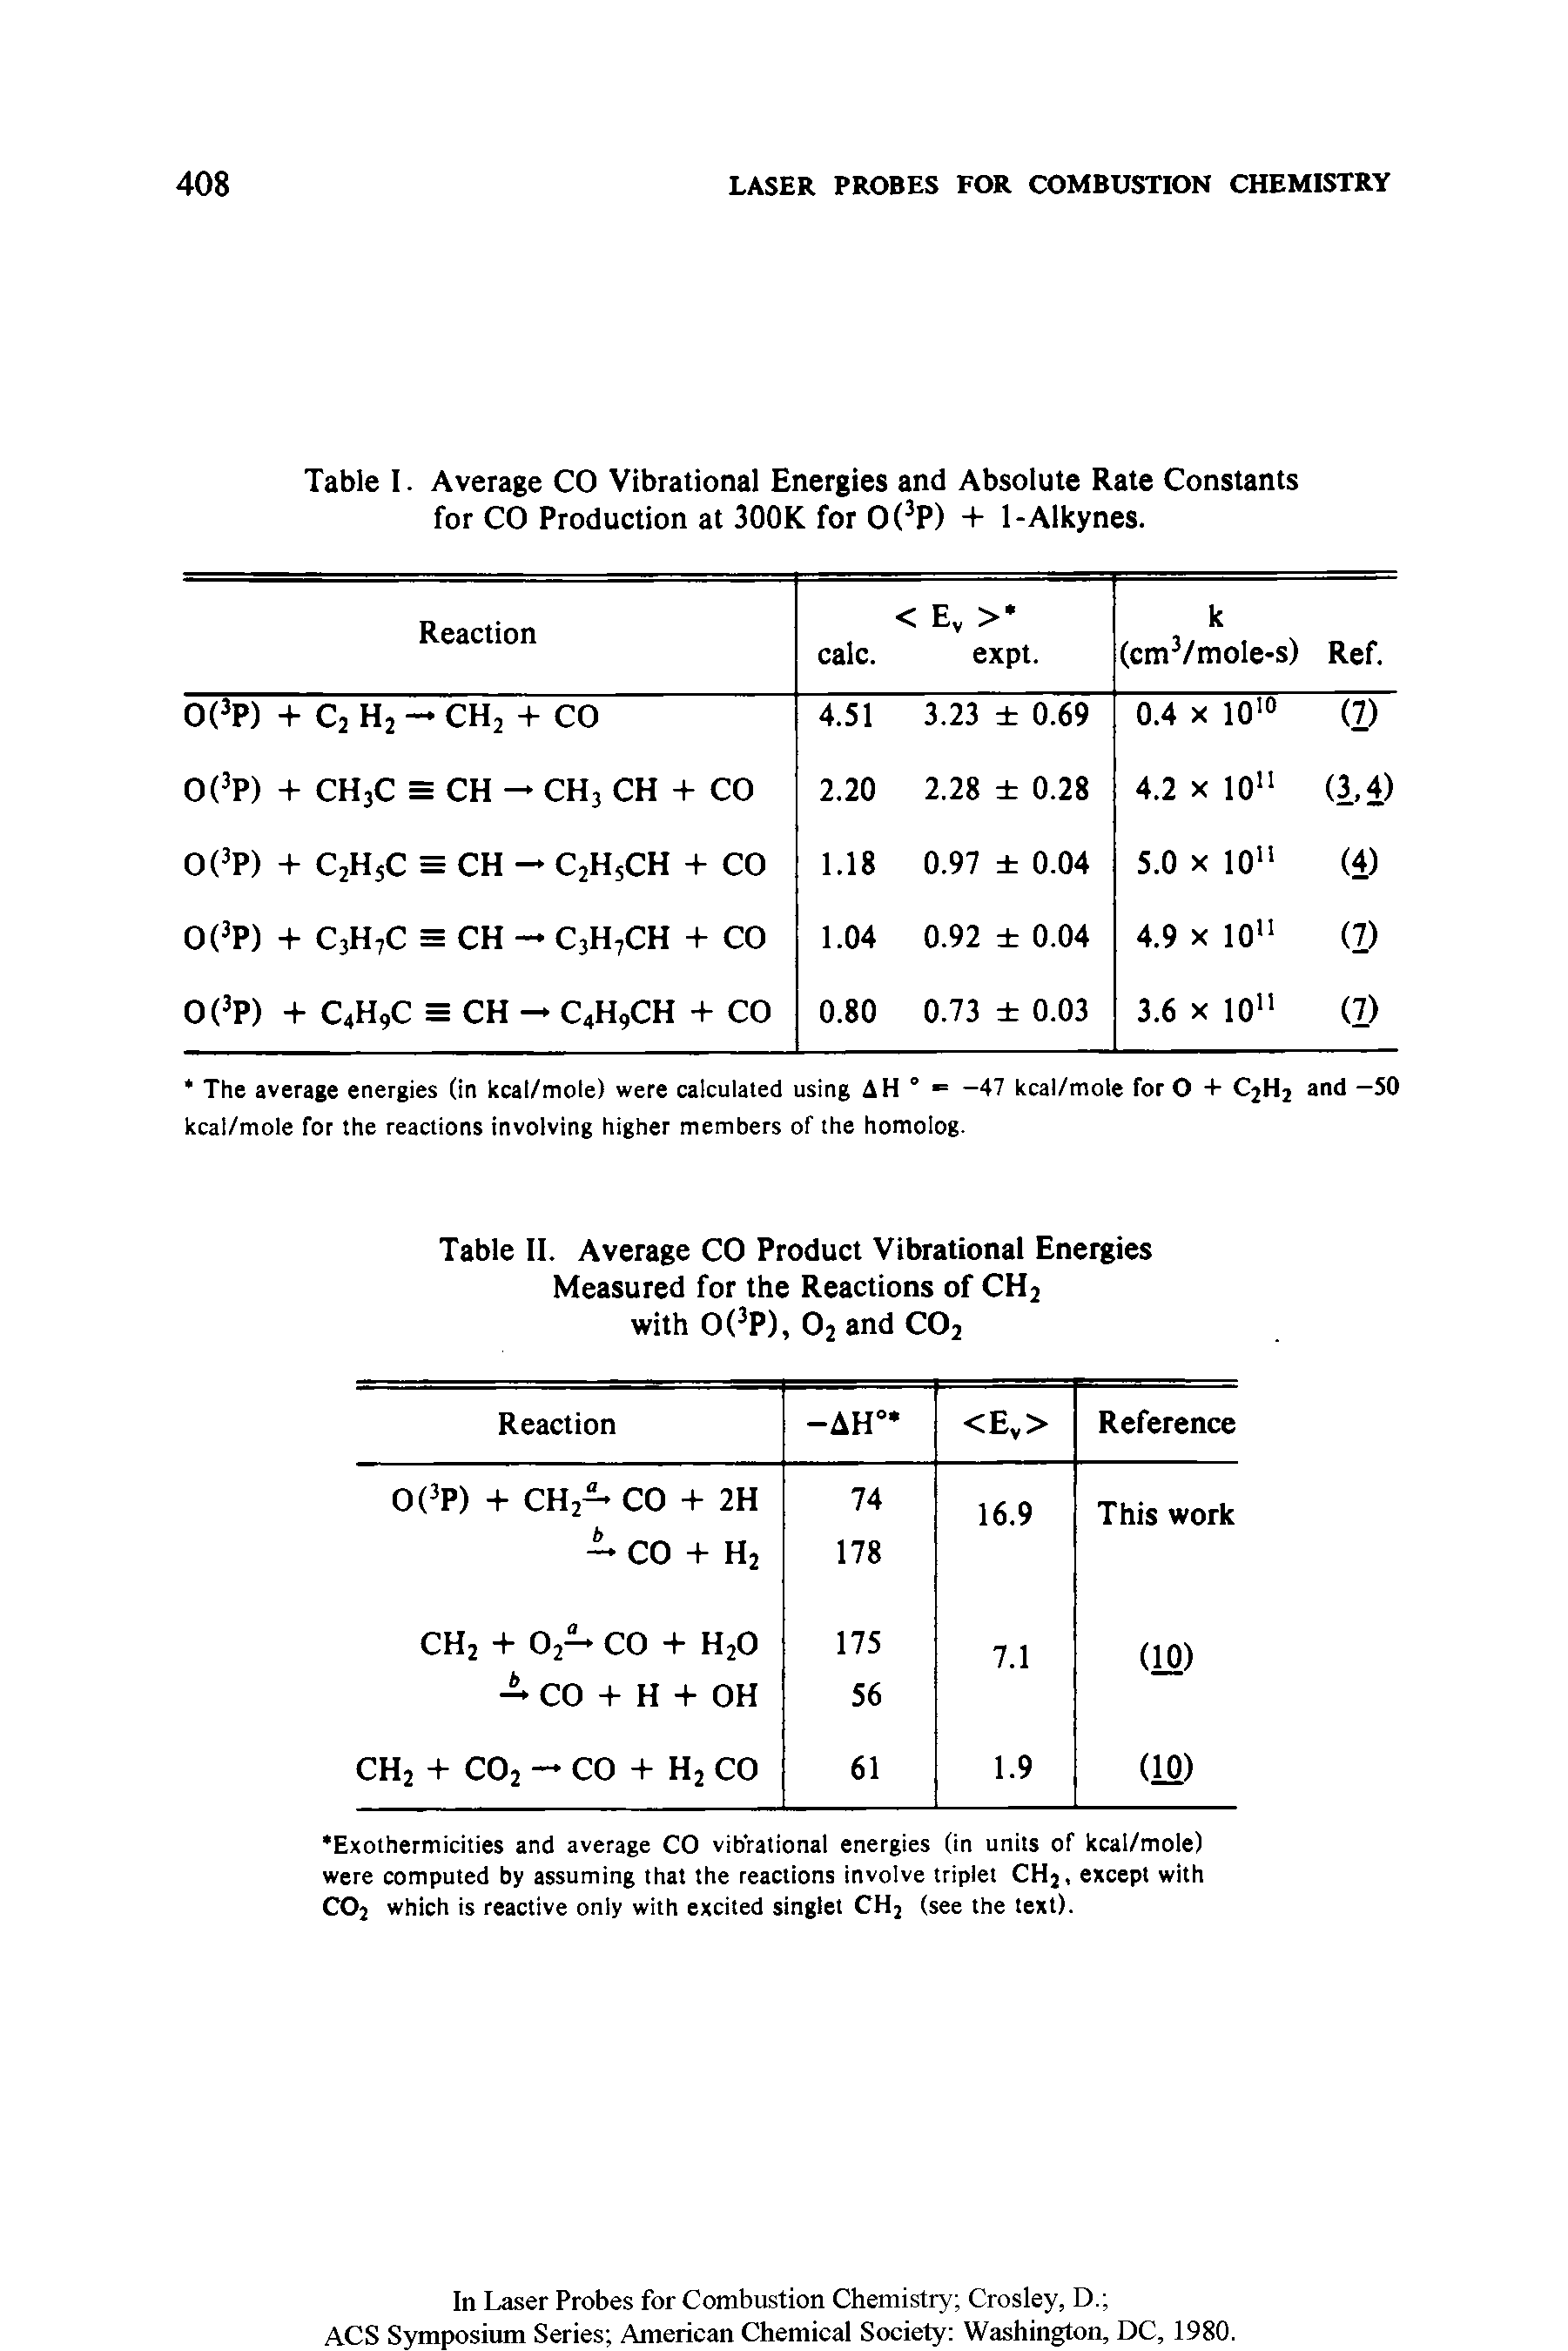 Table II. Average CO Product Vibrational Energies Measured for the Reactions of CH2 with 0(3P), 02 and C02...